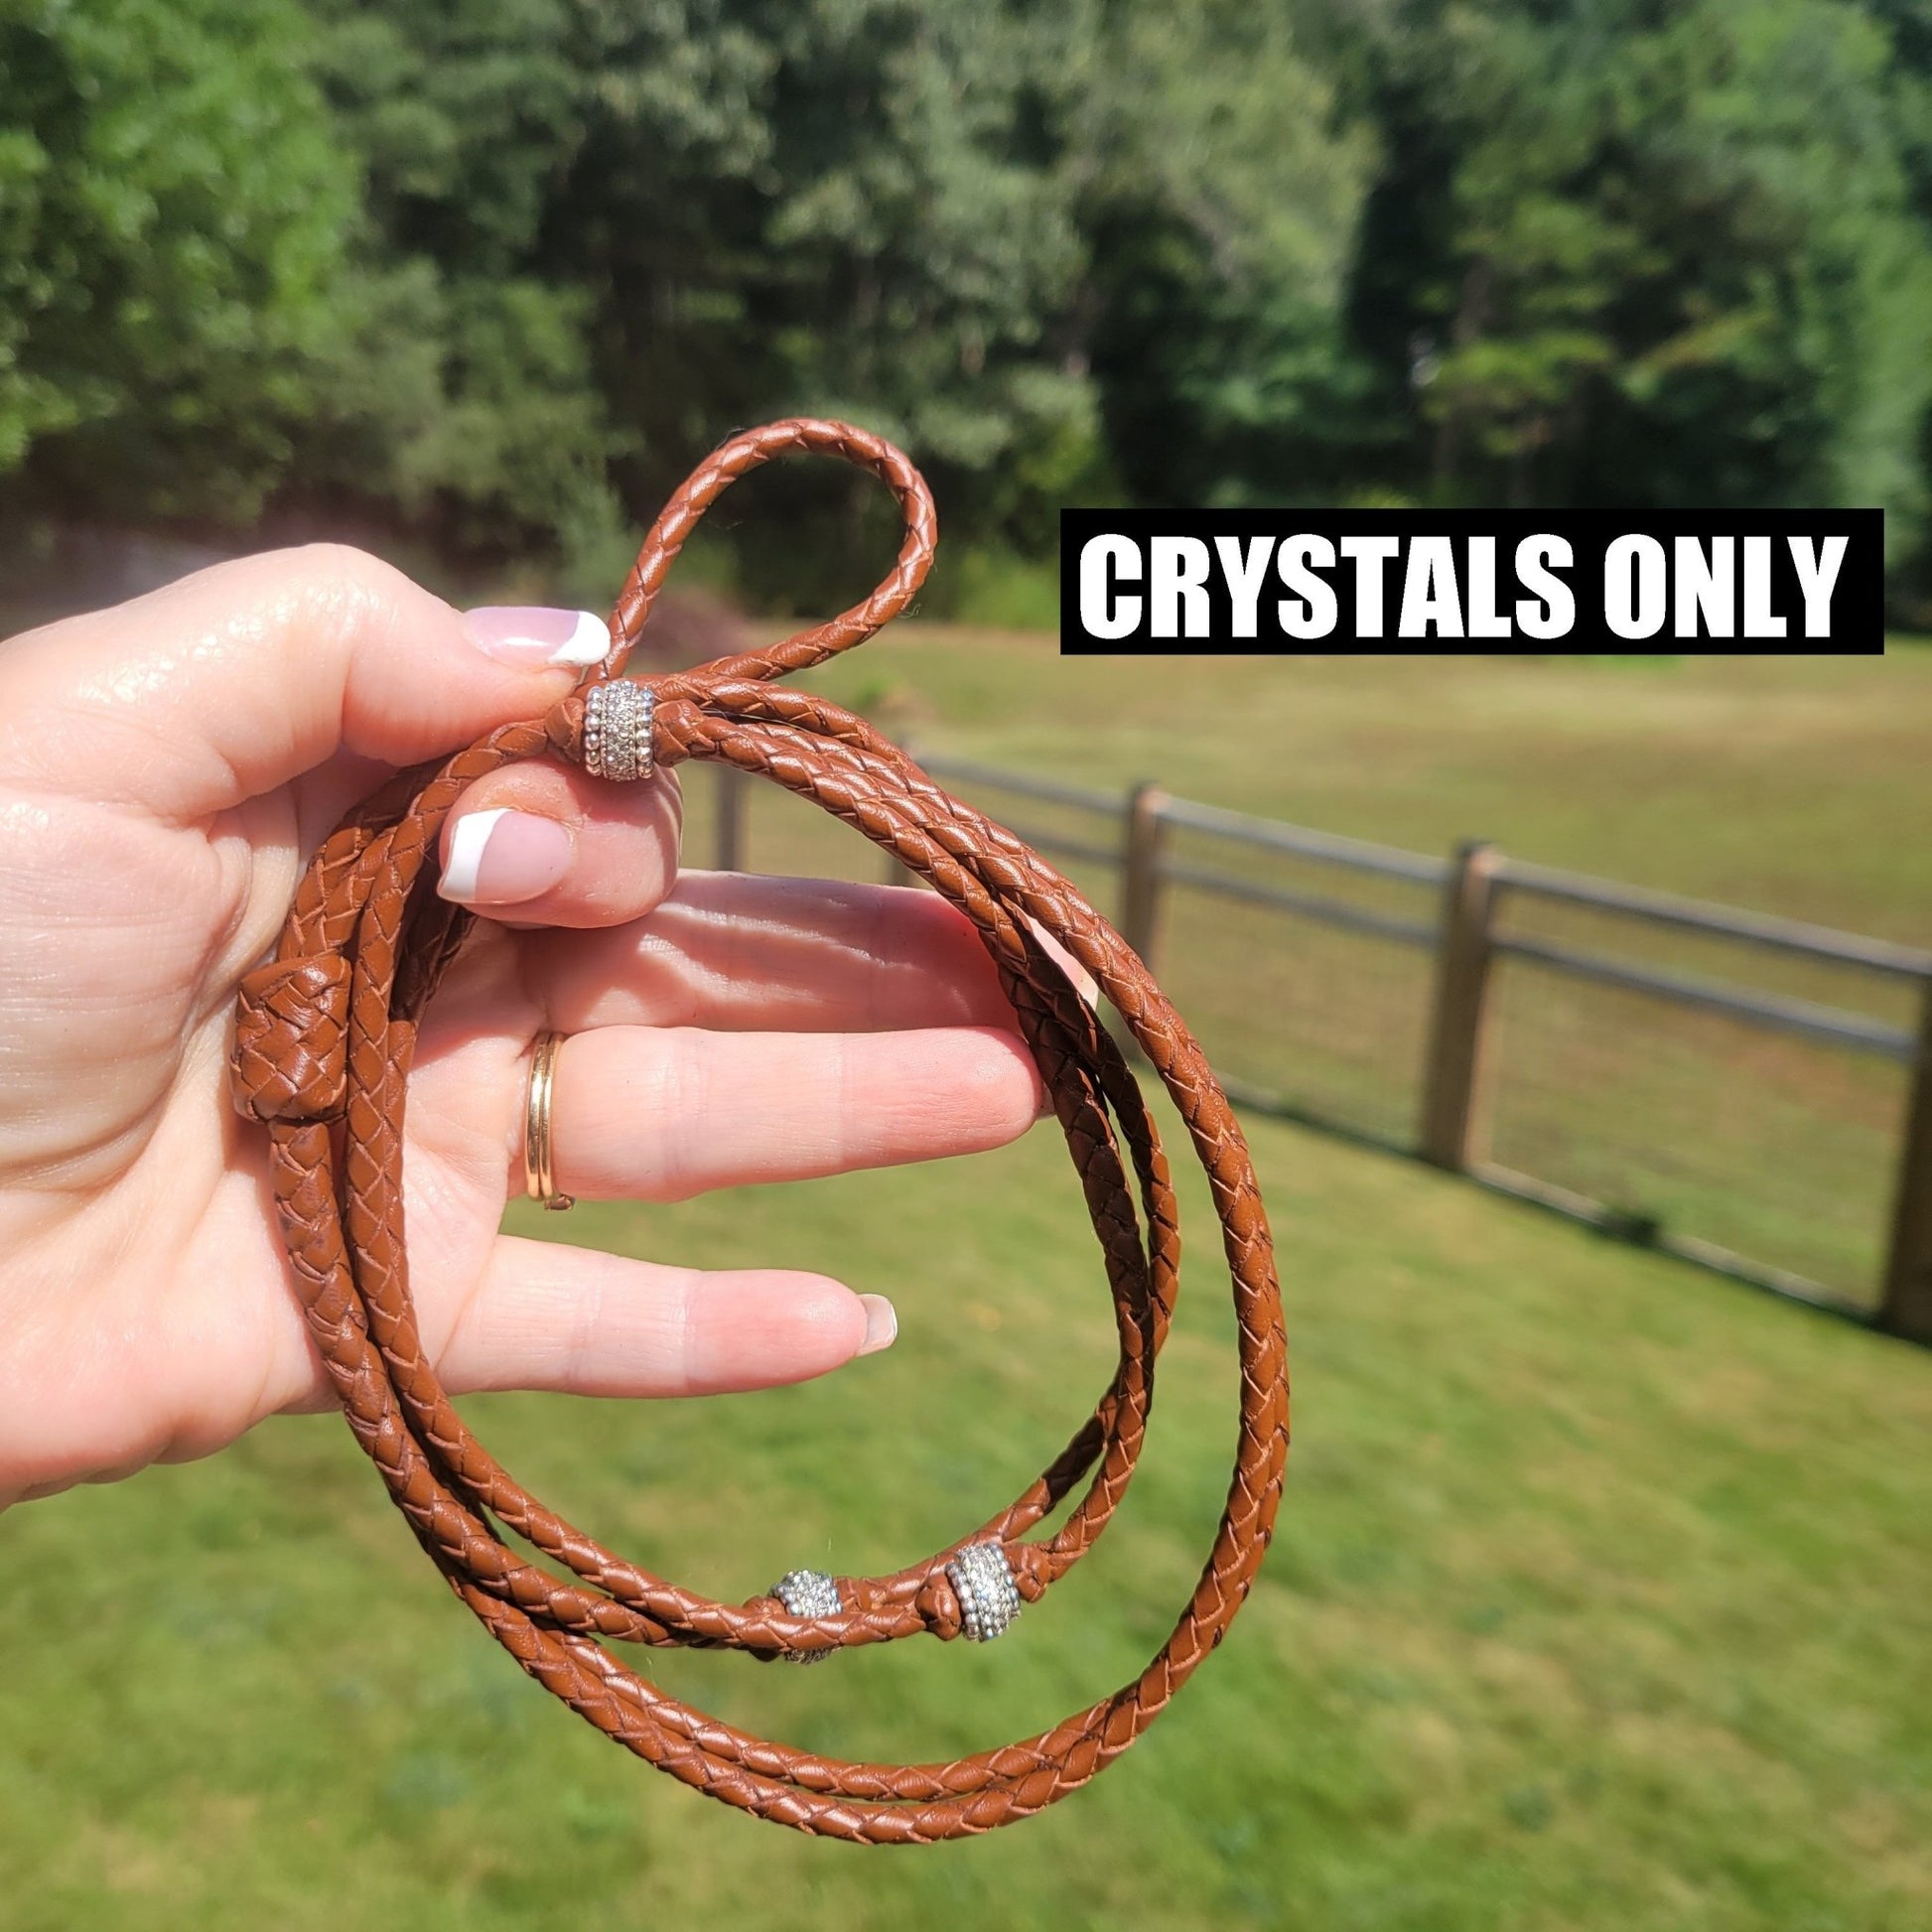 Options for Custom Order Leather Show Lead - ChampionShowLeads